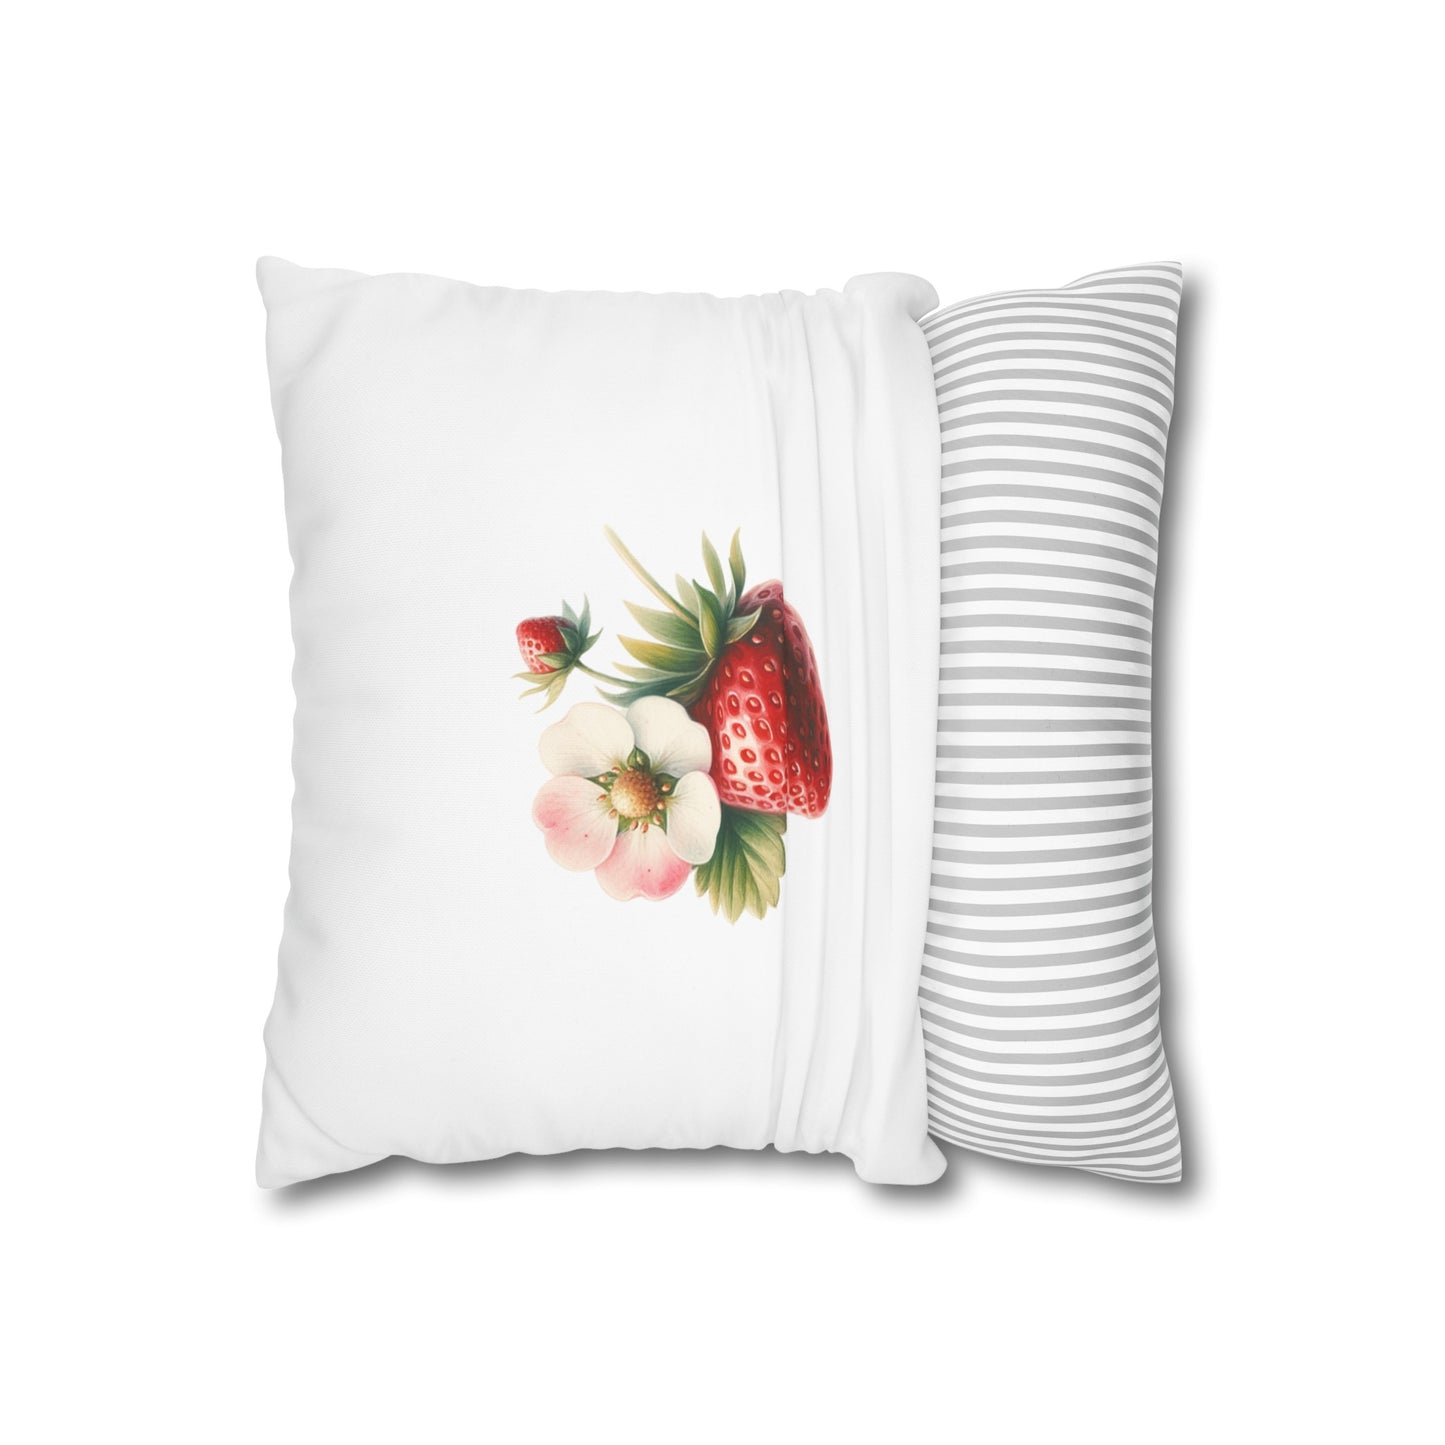 Berry Delicious Strawberry #3 Cushion Cover